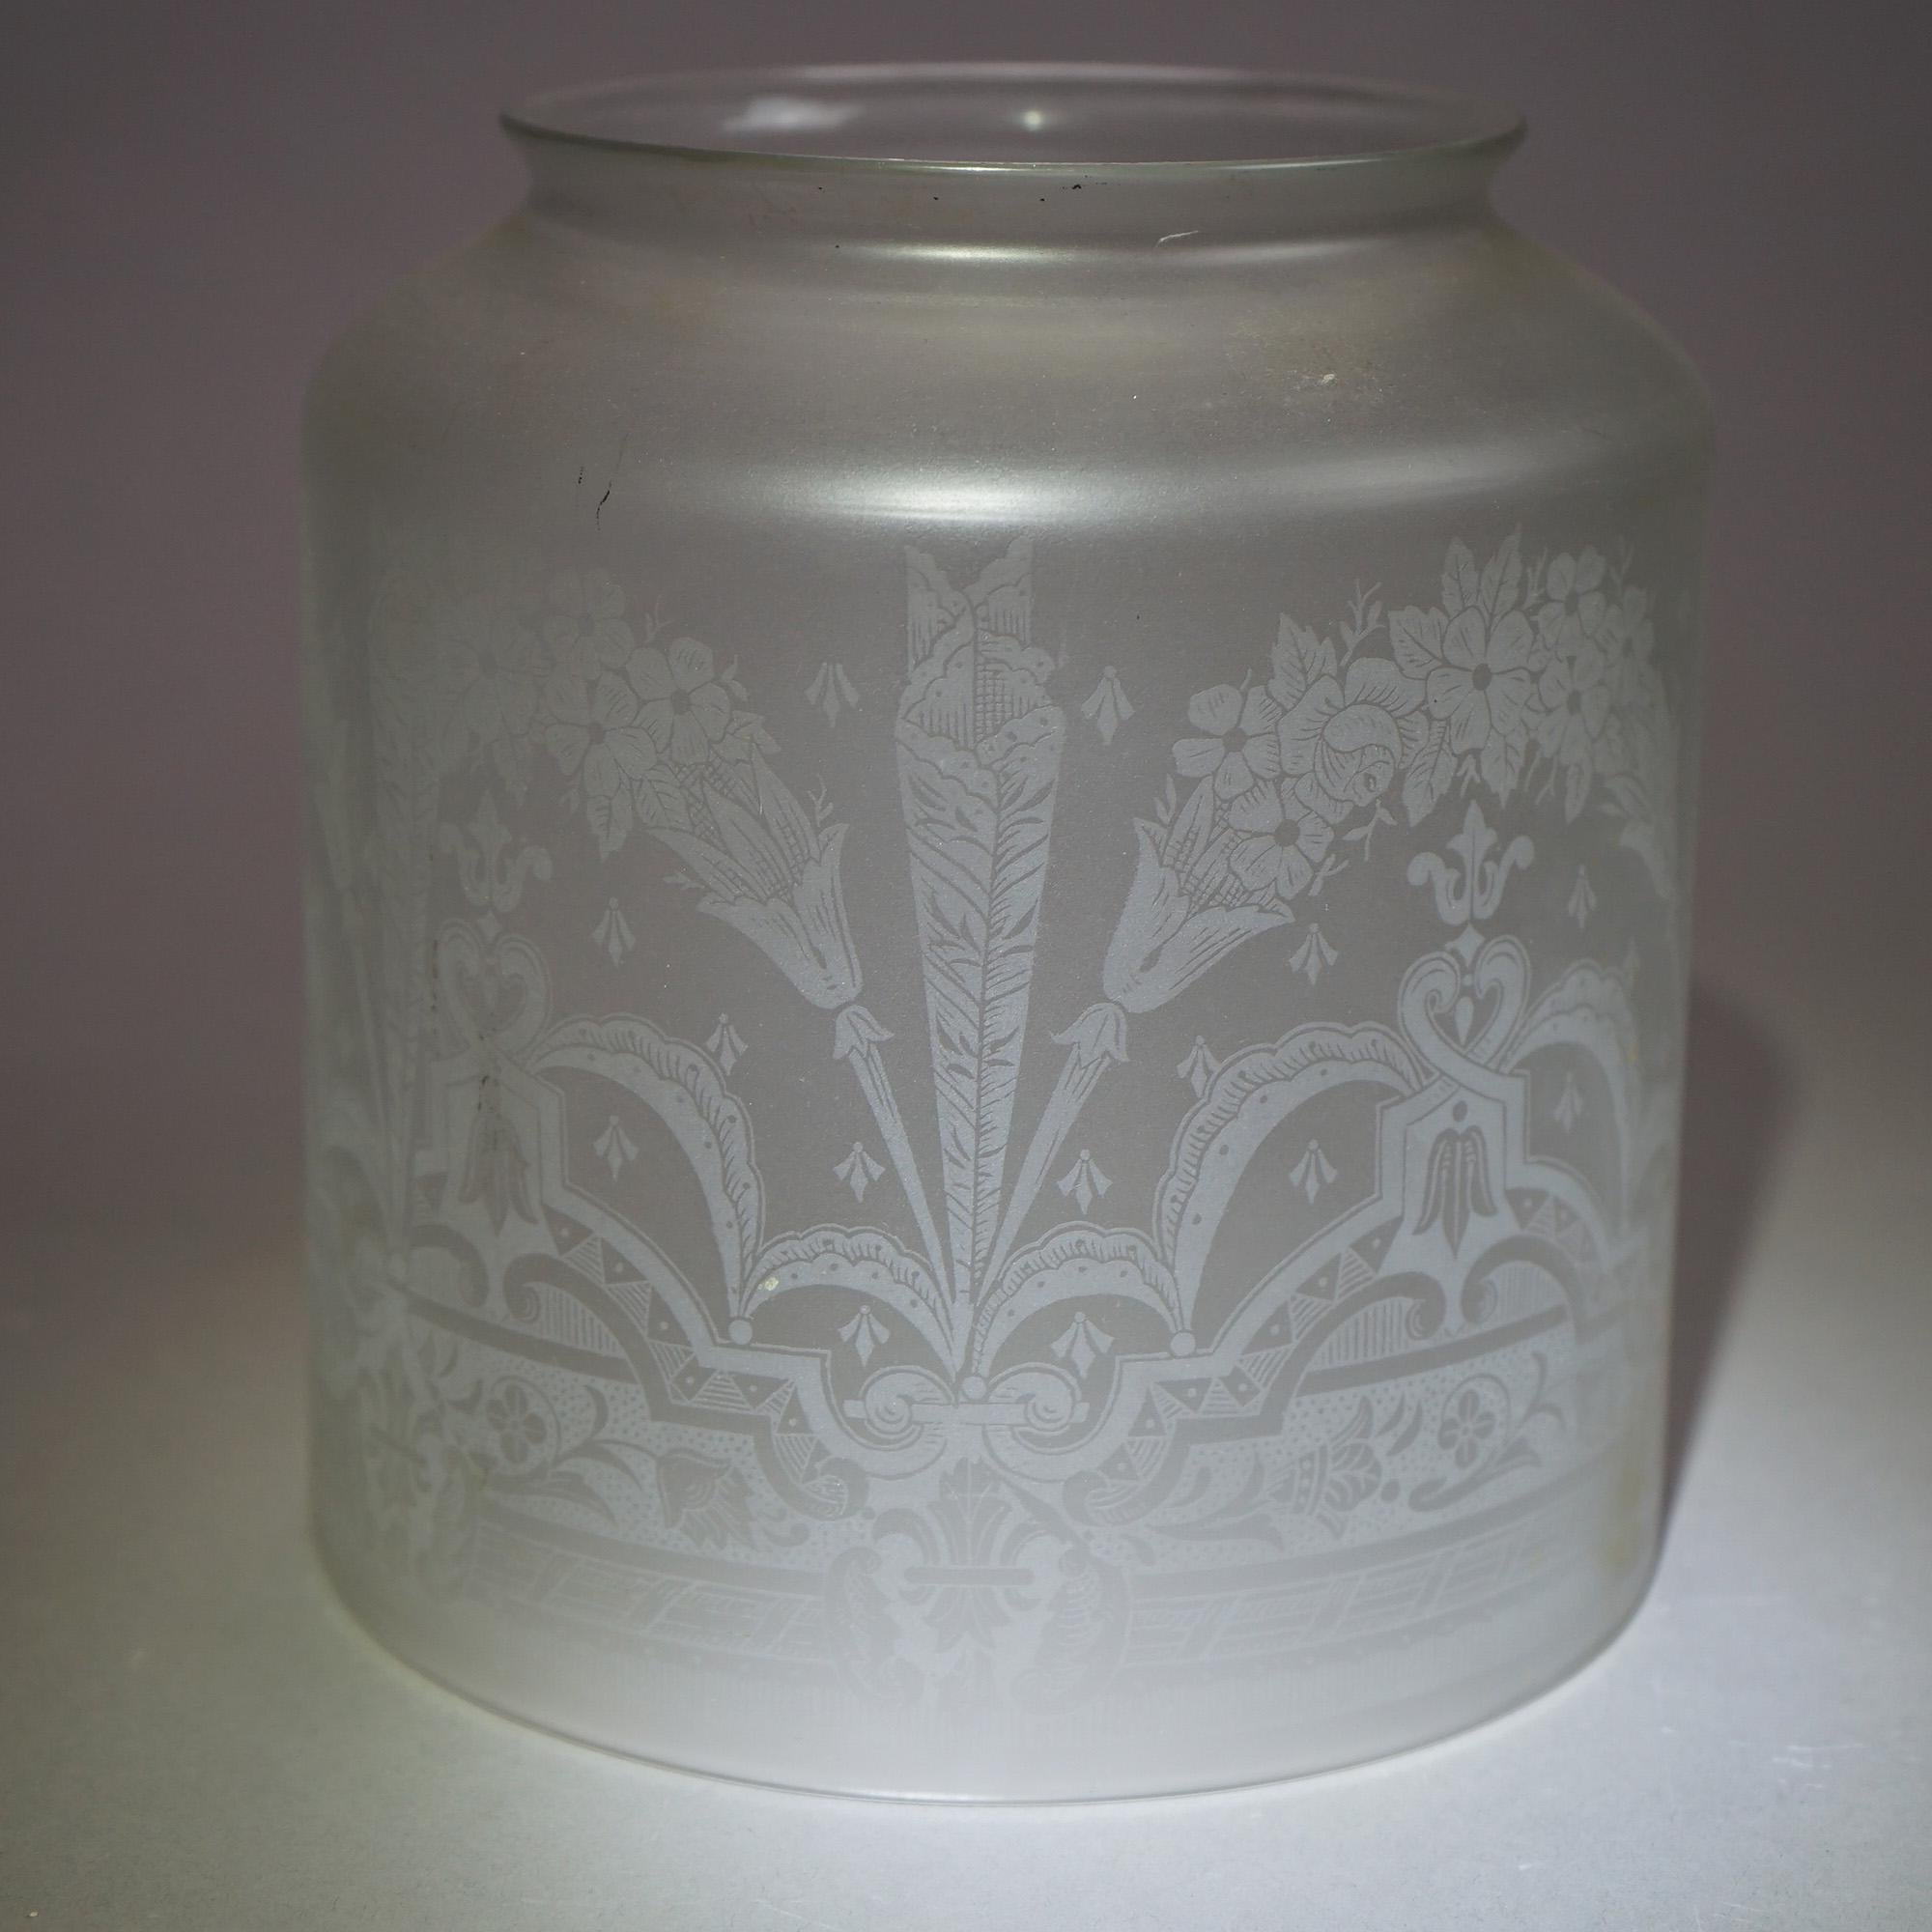 An antique Victorian hall light shade offers frosted glass construction in cylindrical form with etched floral and foliate design, c1890

Measures - 7.25